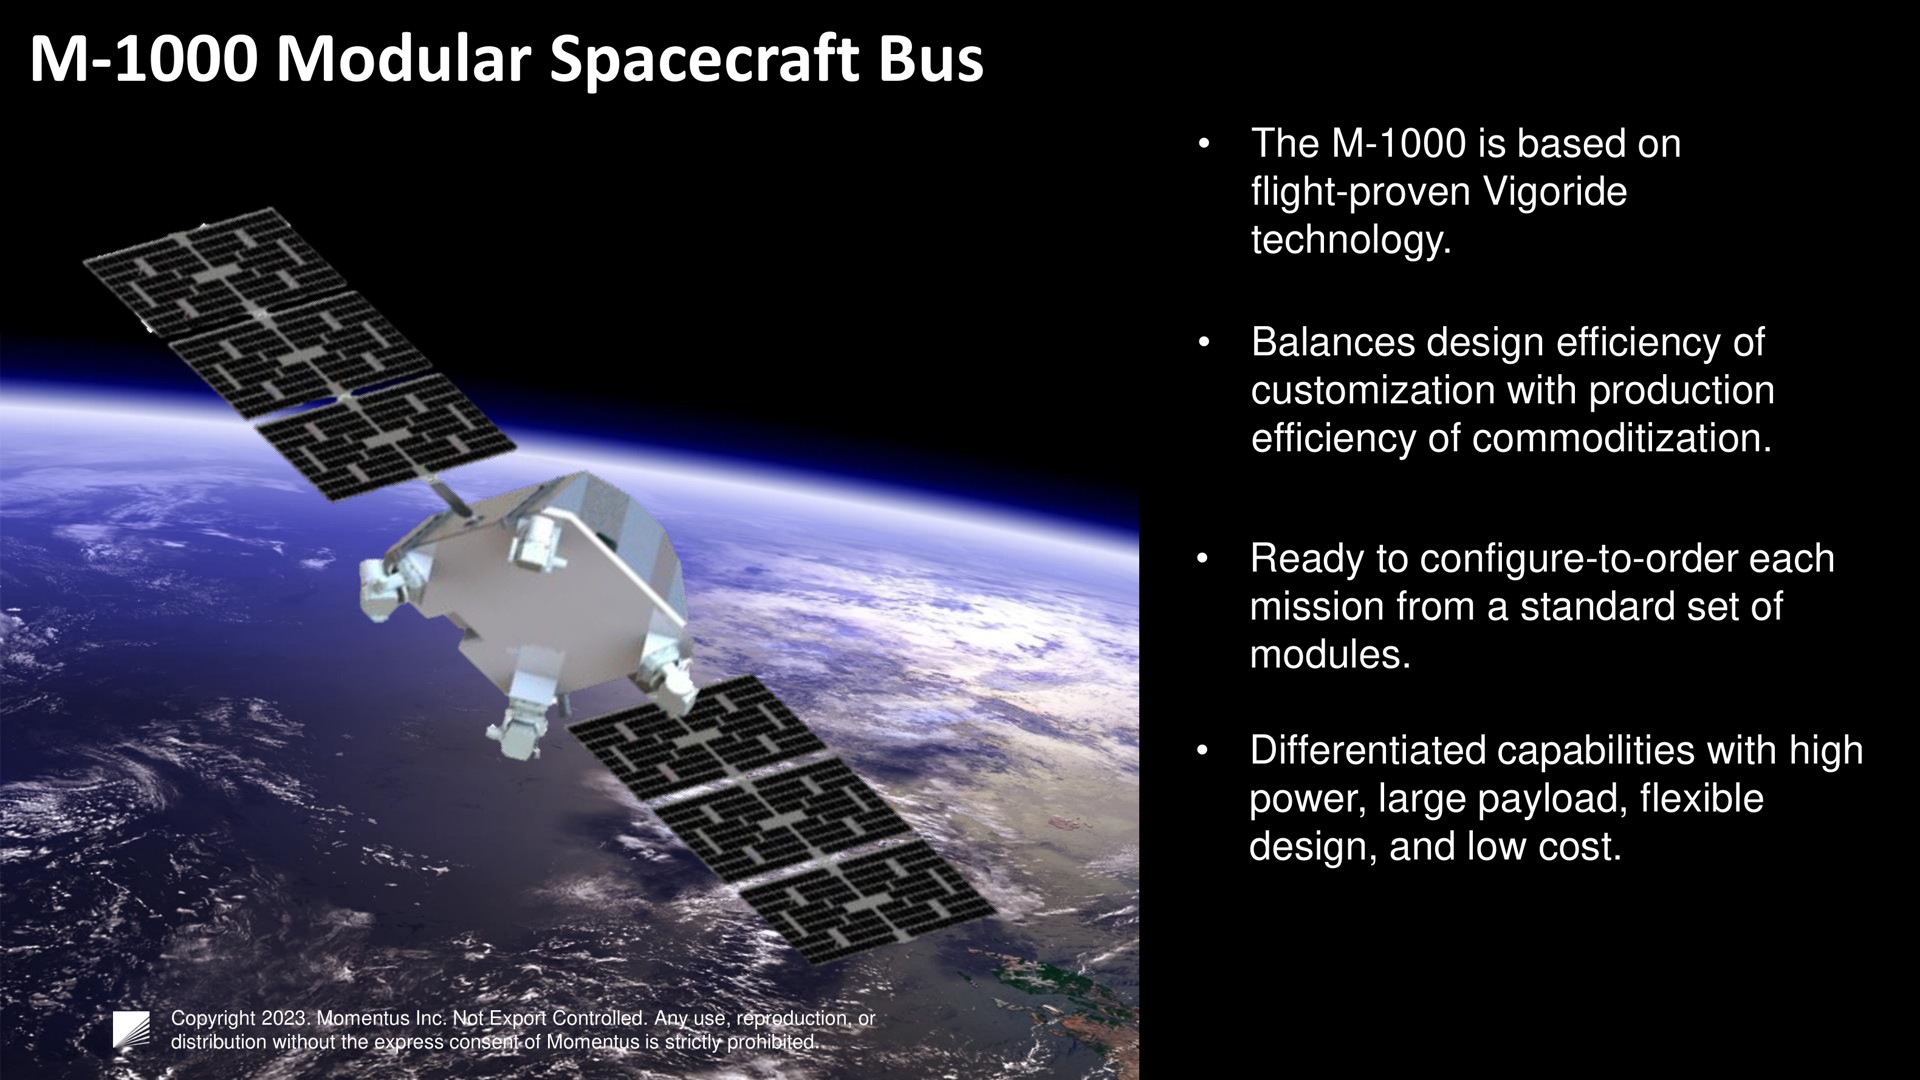 modular bus the is based on flight proven technology balances design efficiency of with production efficiency of ready to configure to order each mission from a standard set of modules differentiated capabilities with high power large flexible design and low cost | Momentus